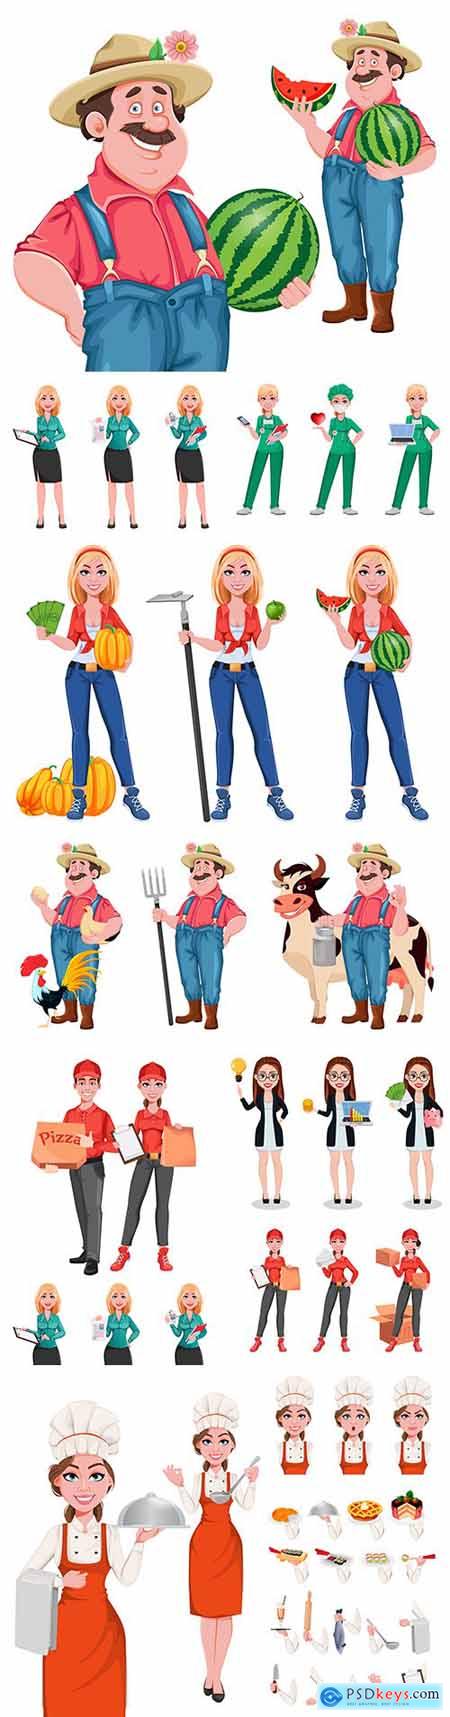 Business woman and man cartoon character of different professions